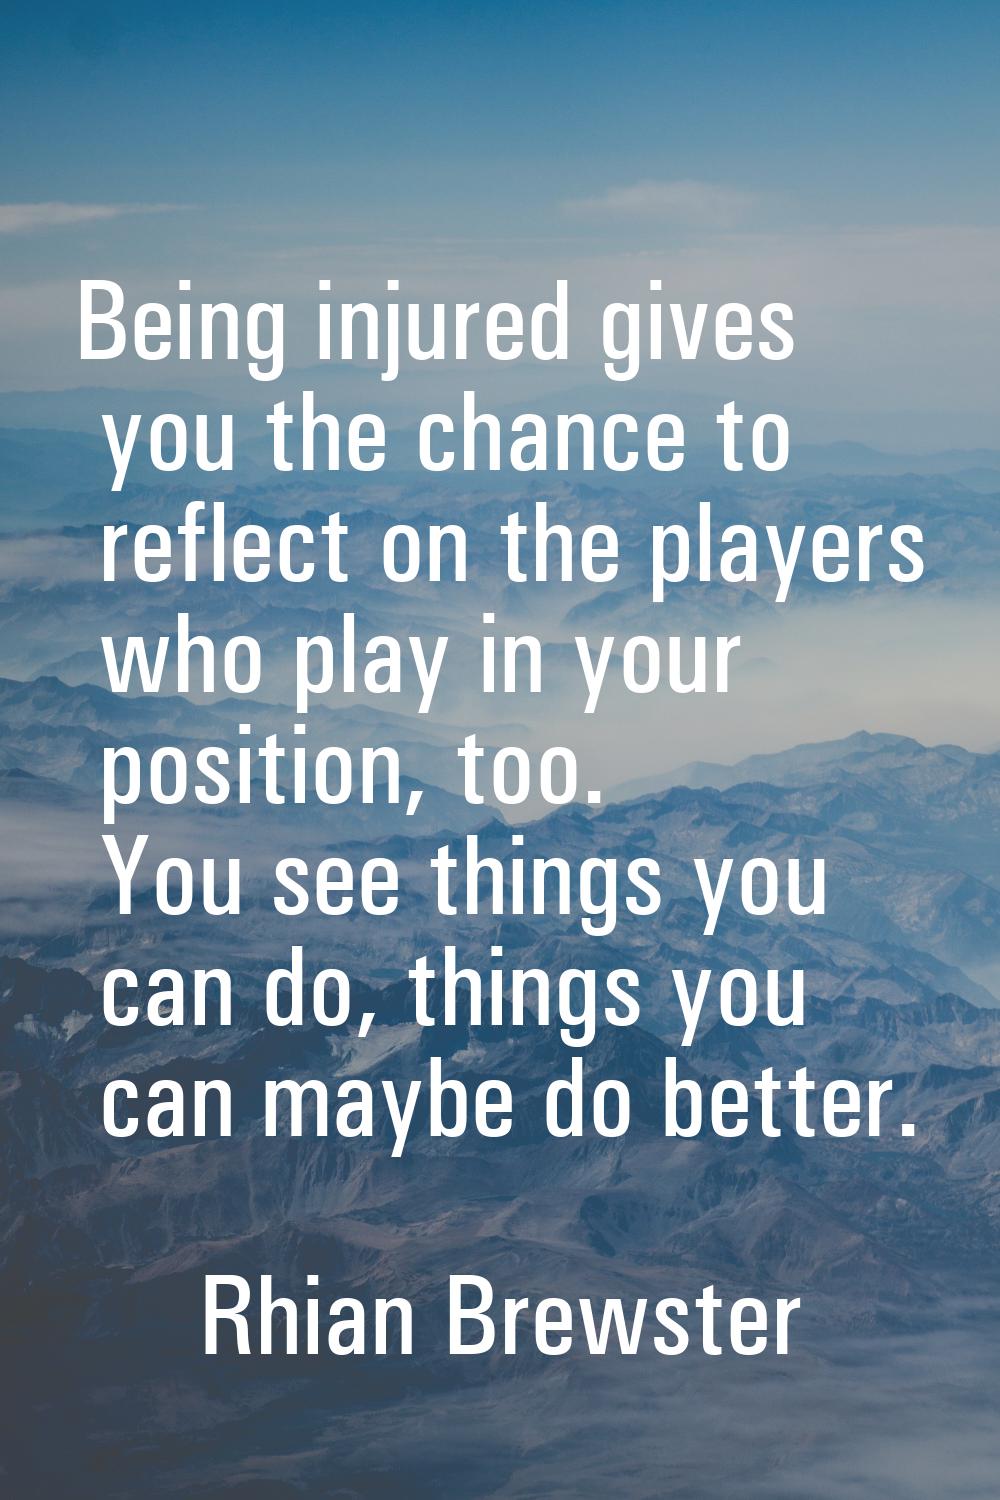 Being injured gives you the chance to reflect on the players who play in your position, too. You se